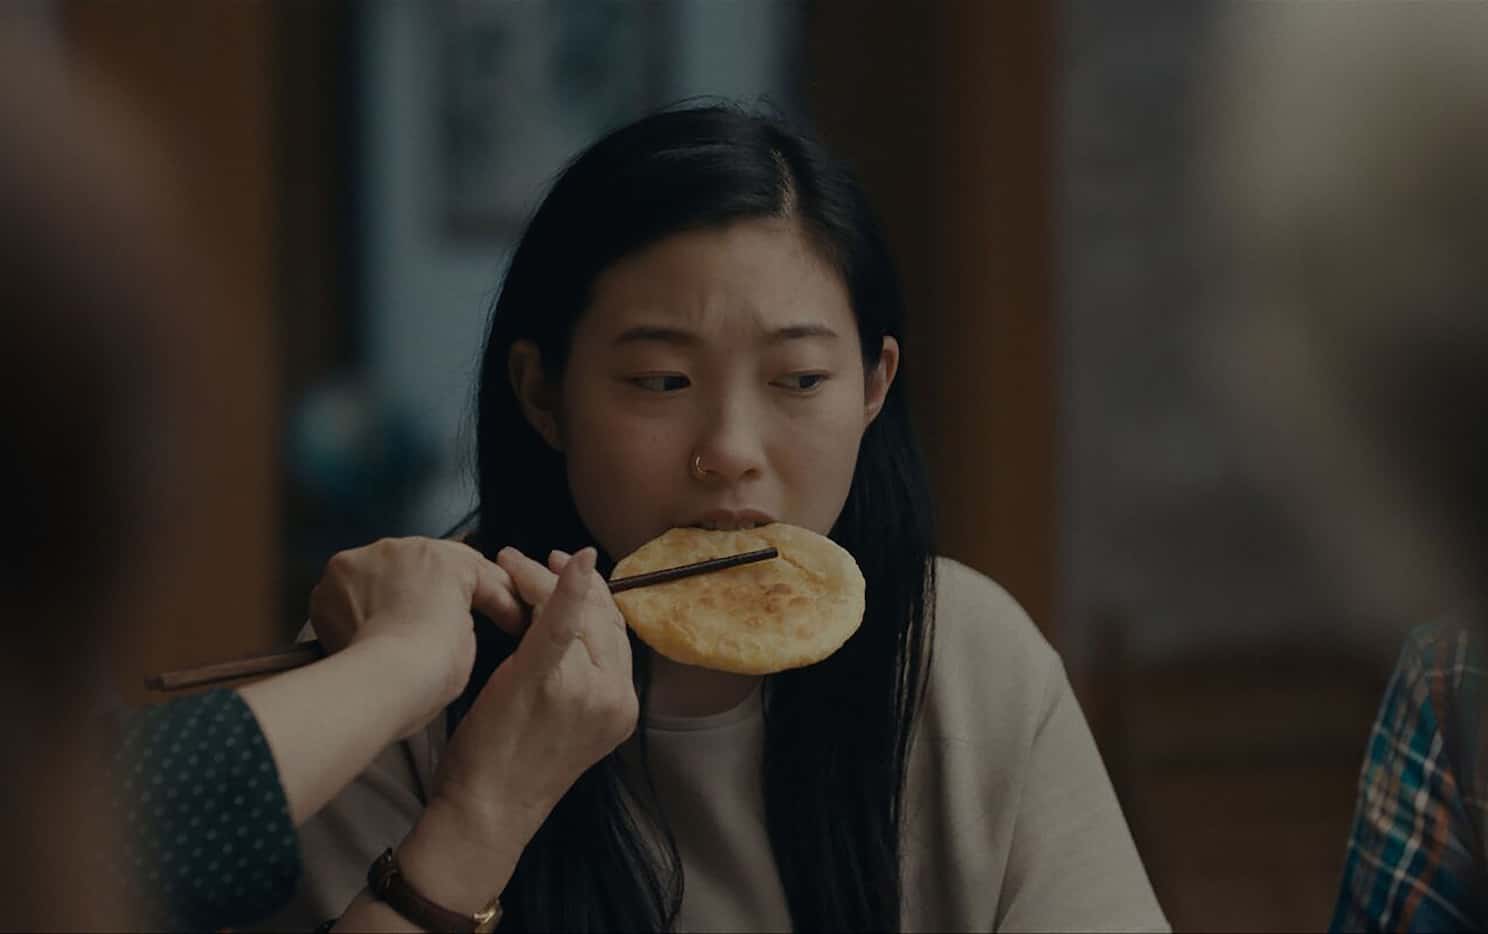 Billi (Awkwafina) accepts food from her grandmother's chopsticks in The Farewell.